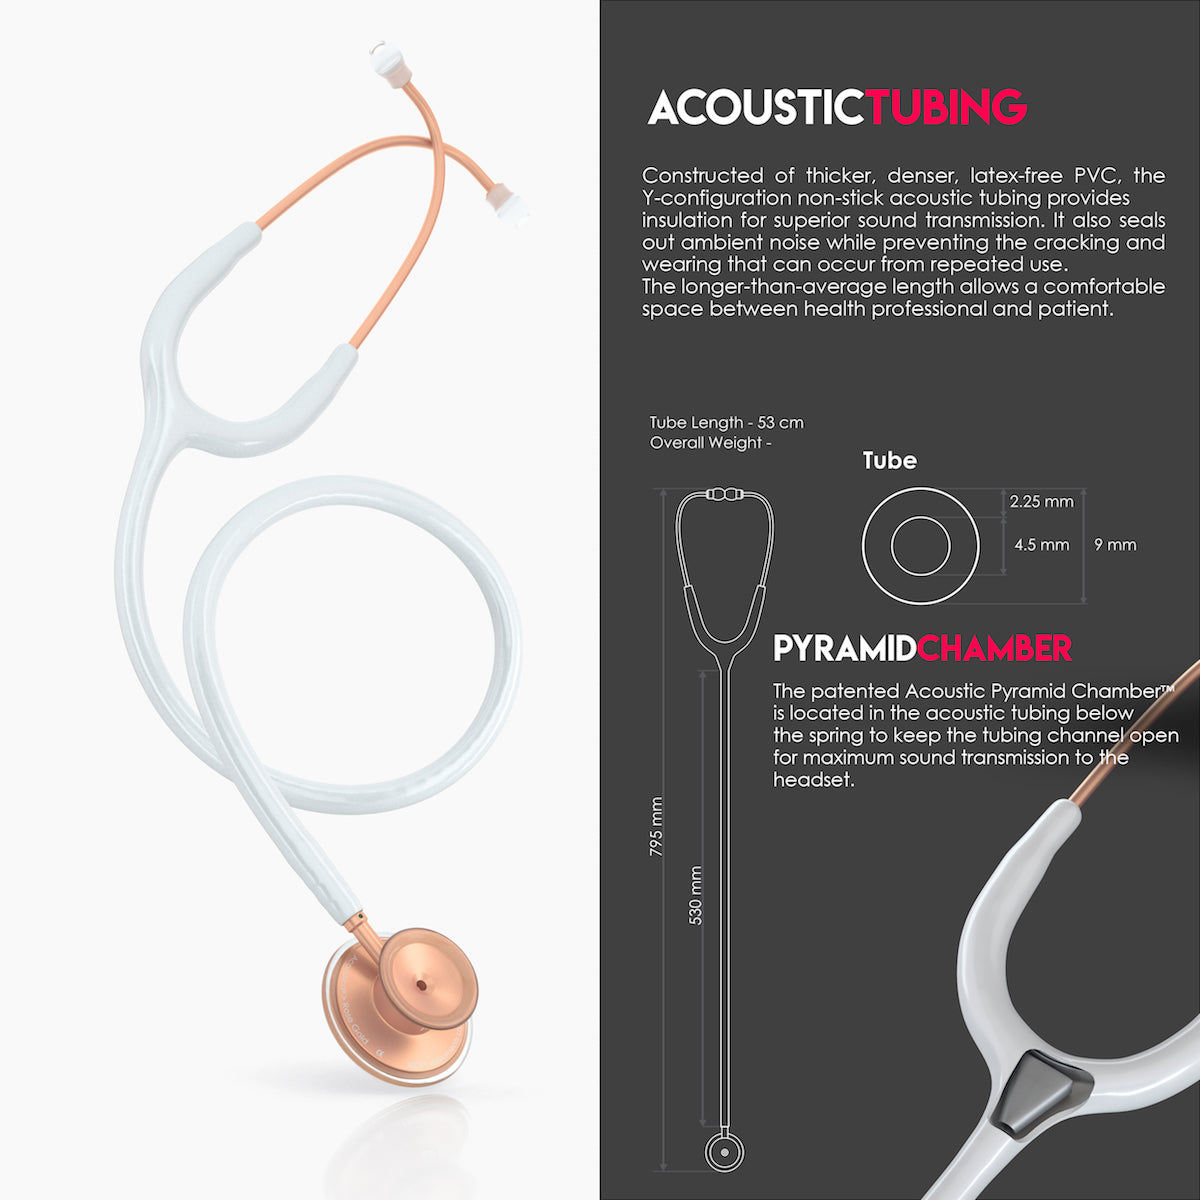 mdf instruments acoustica stethoscope